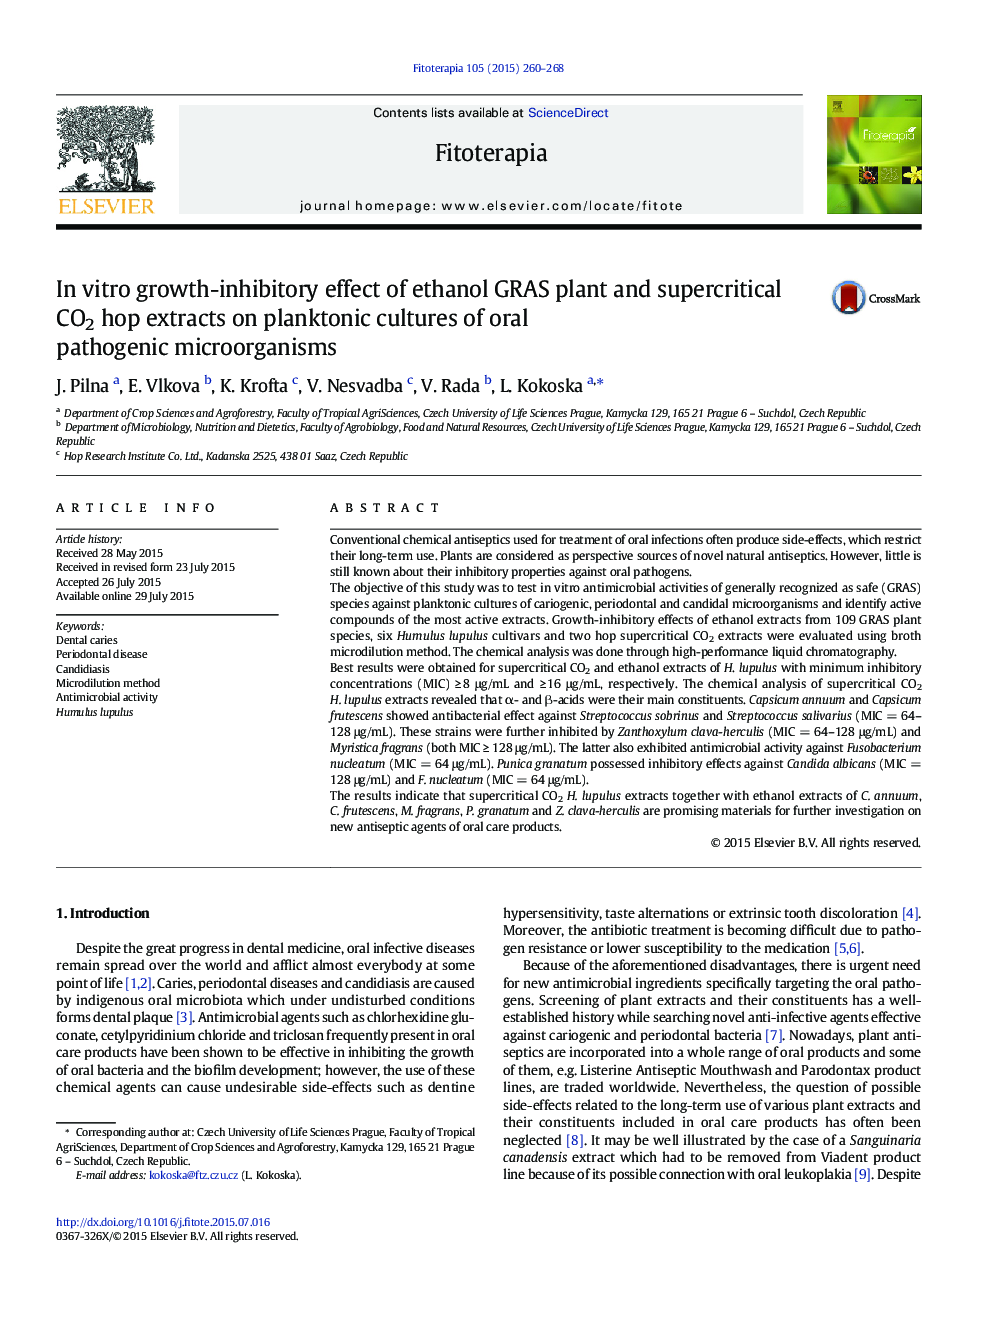 In vitro growth-inhibitory effect of ethanol GRAS plant and supercritical CO2 hop extracts on planktonic cultures of oral pathogenic microorganisms